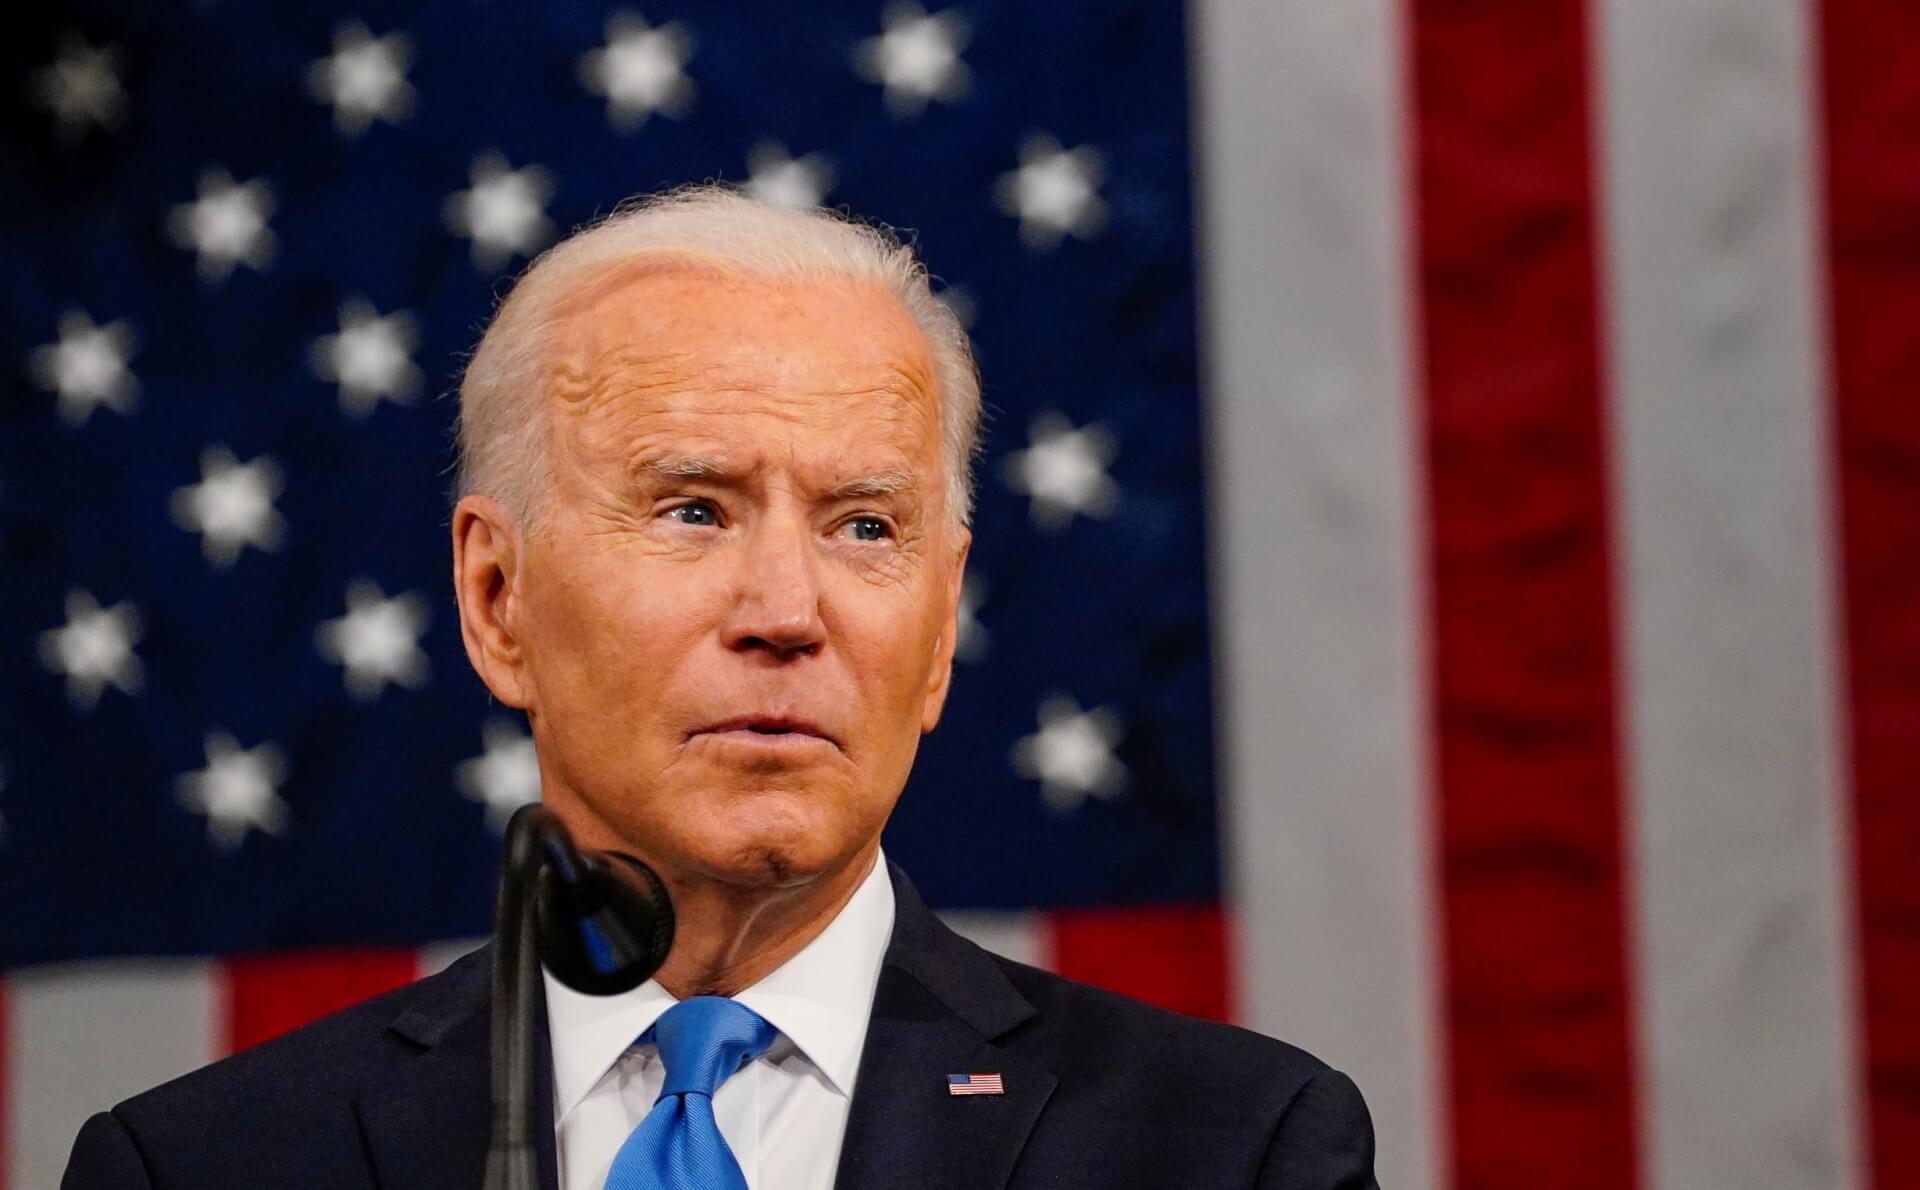 Biden Calls for Intelligence Report on COVID-19 Origin As Wuhan Lab Leak Theory Grows